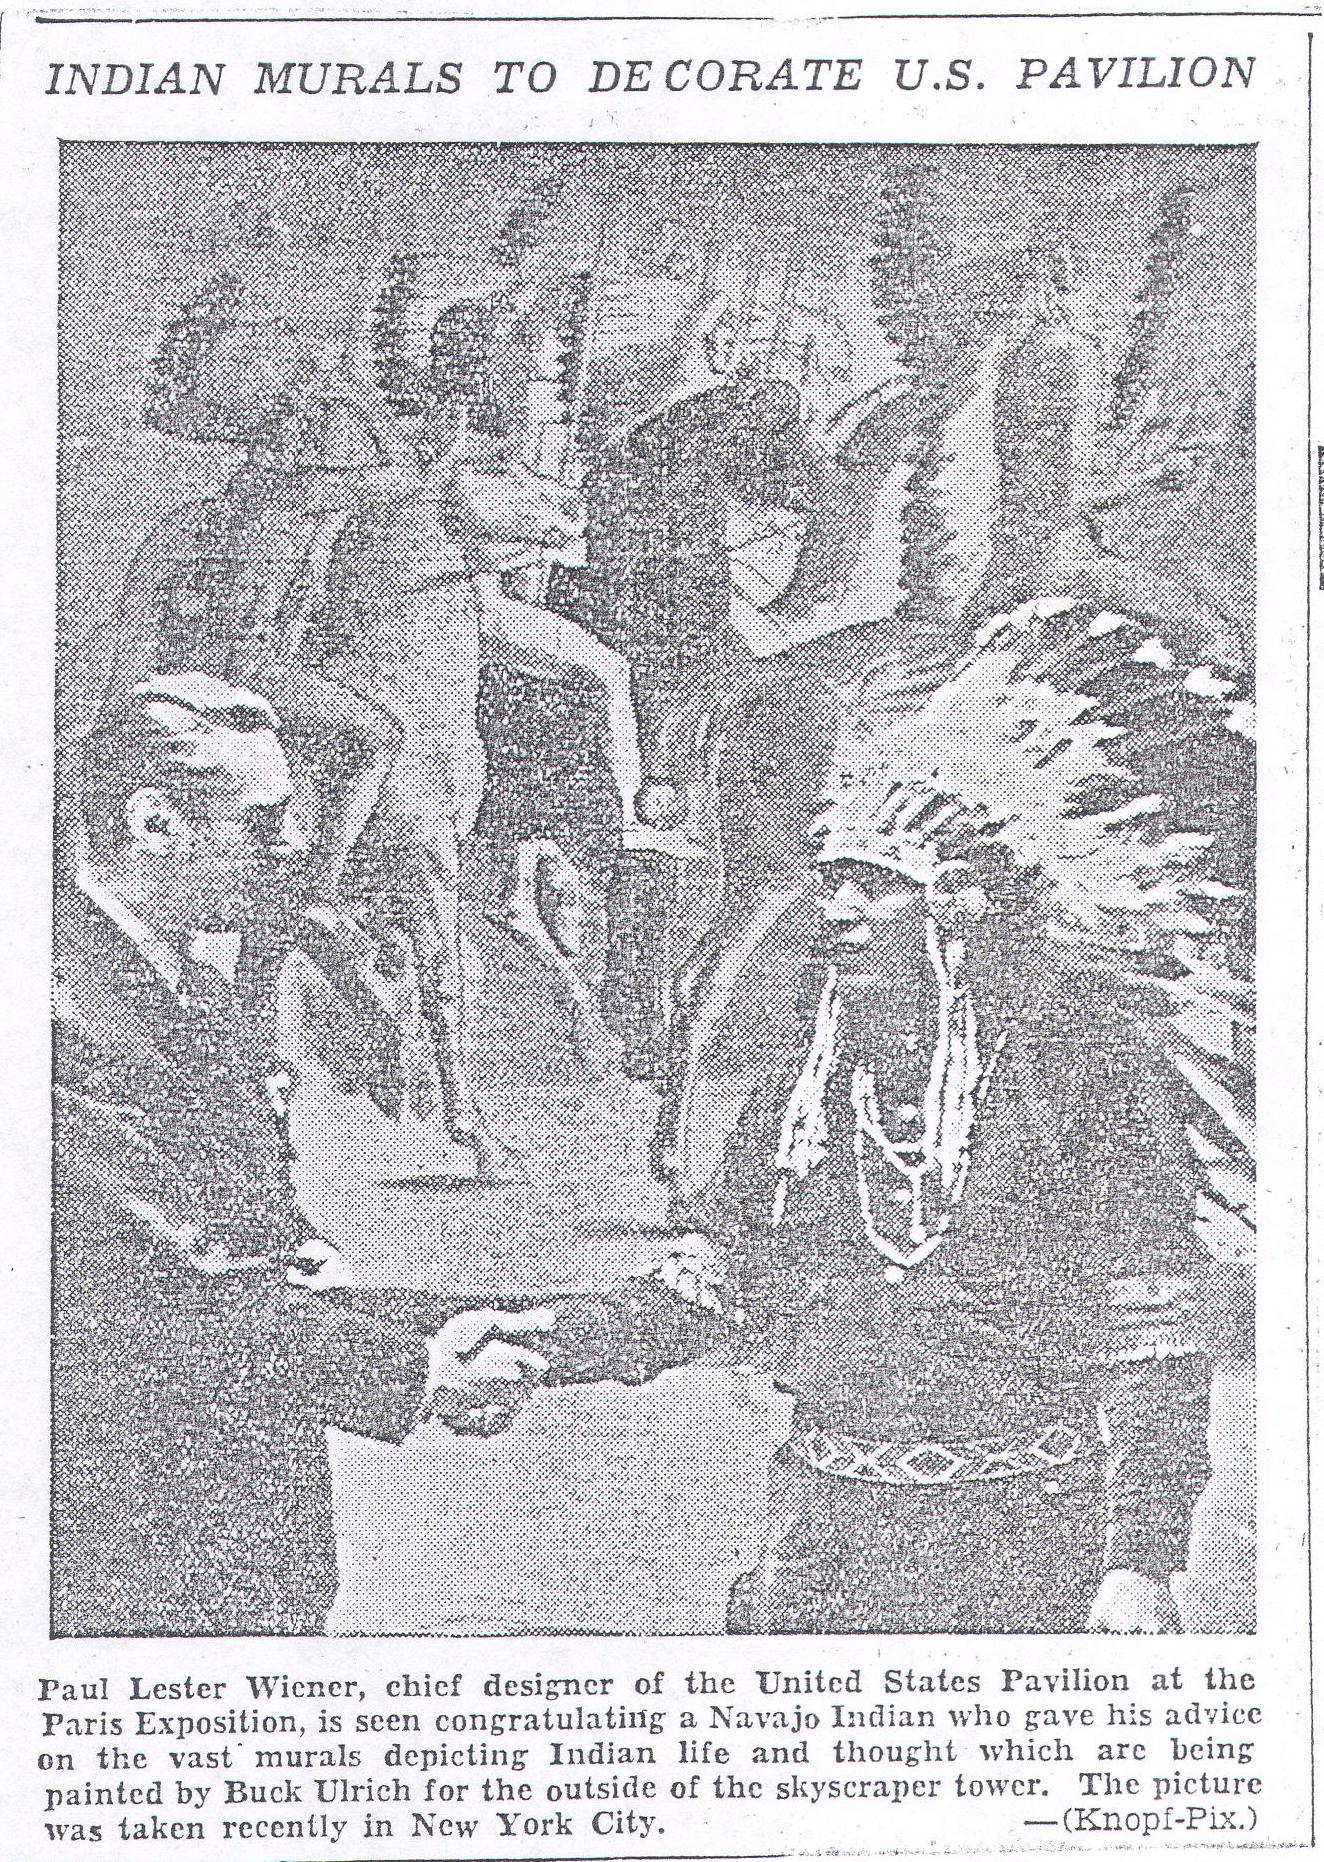 Newspaper clipping of a man in a suit shaking the hand of a man in a Native American feathered war bonnet; the headline reads "Indian Murals to Decorate U.S. Pavilion"